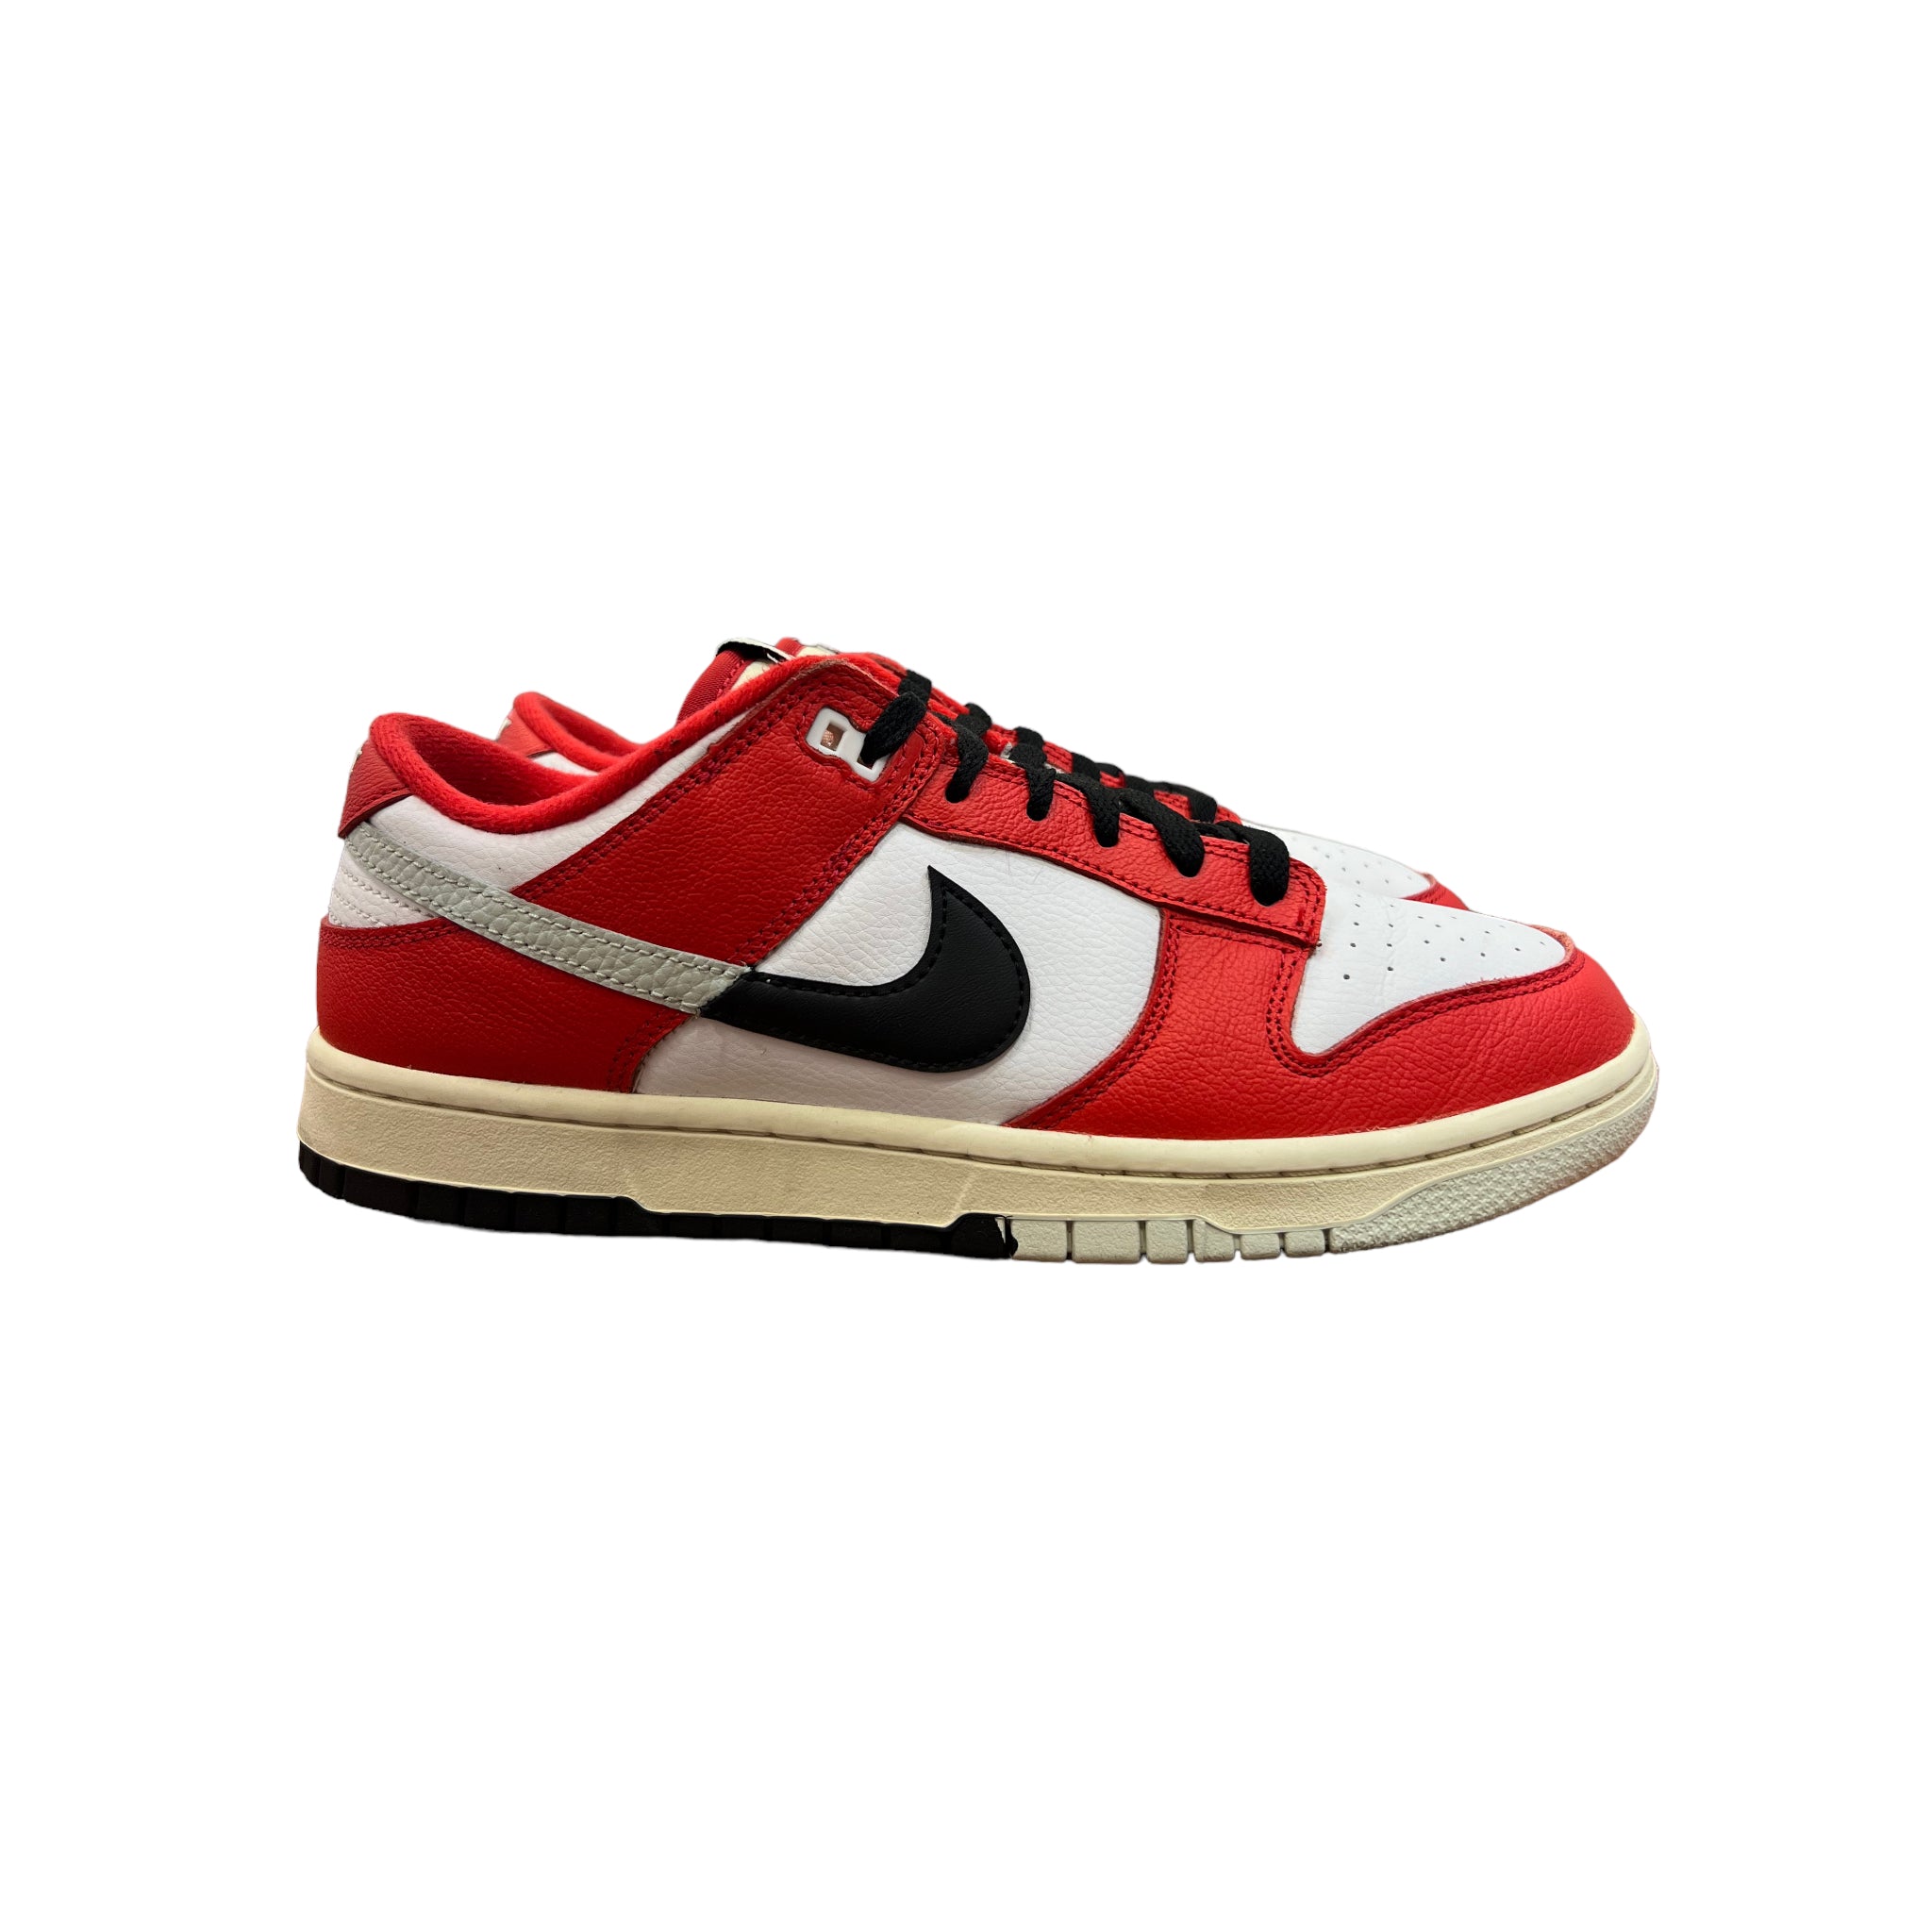 Nike Dunk Low Chicago Split Used 9 – Get In Where You Fit In